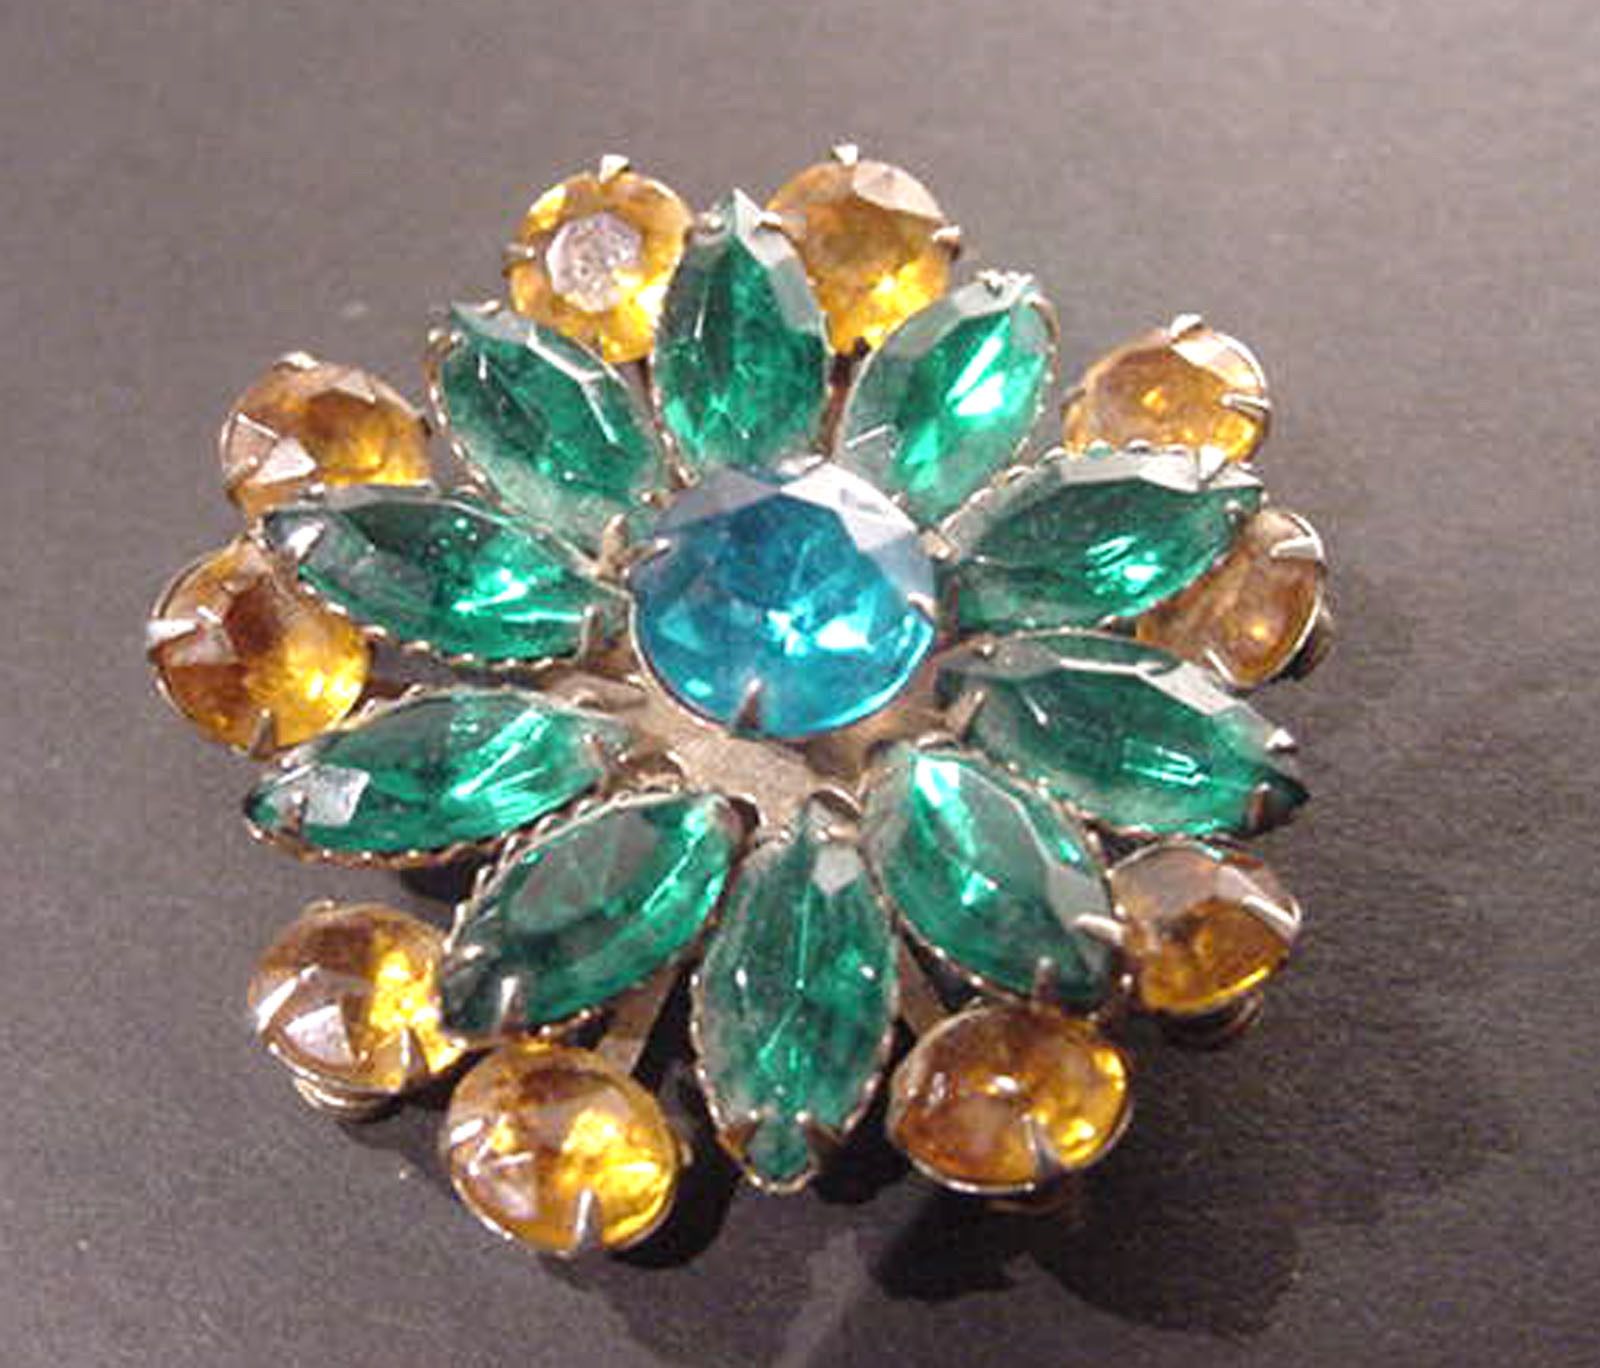   Lee Large Blue Green Topaz Floral Rhinestone Brooch Pin Signed